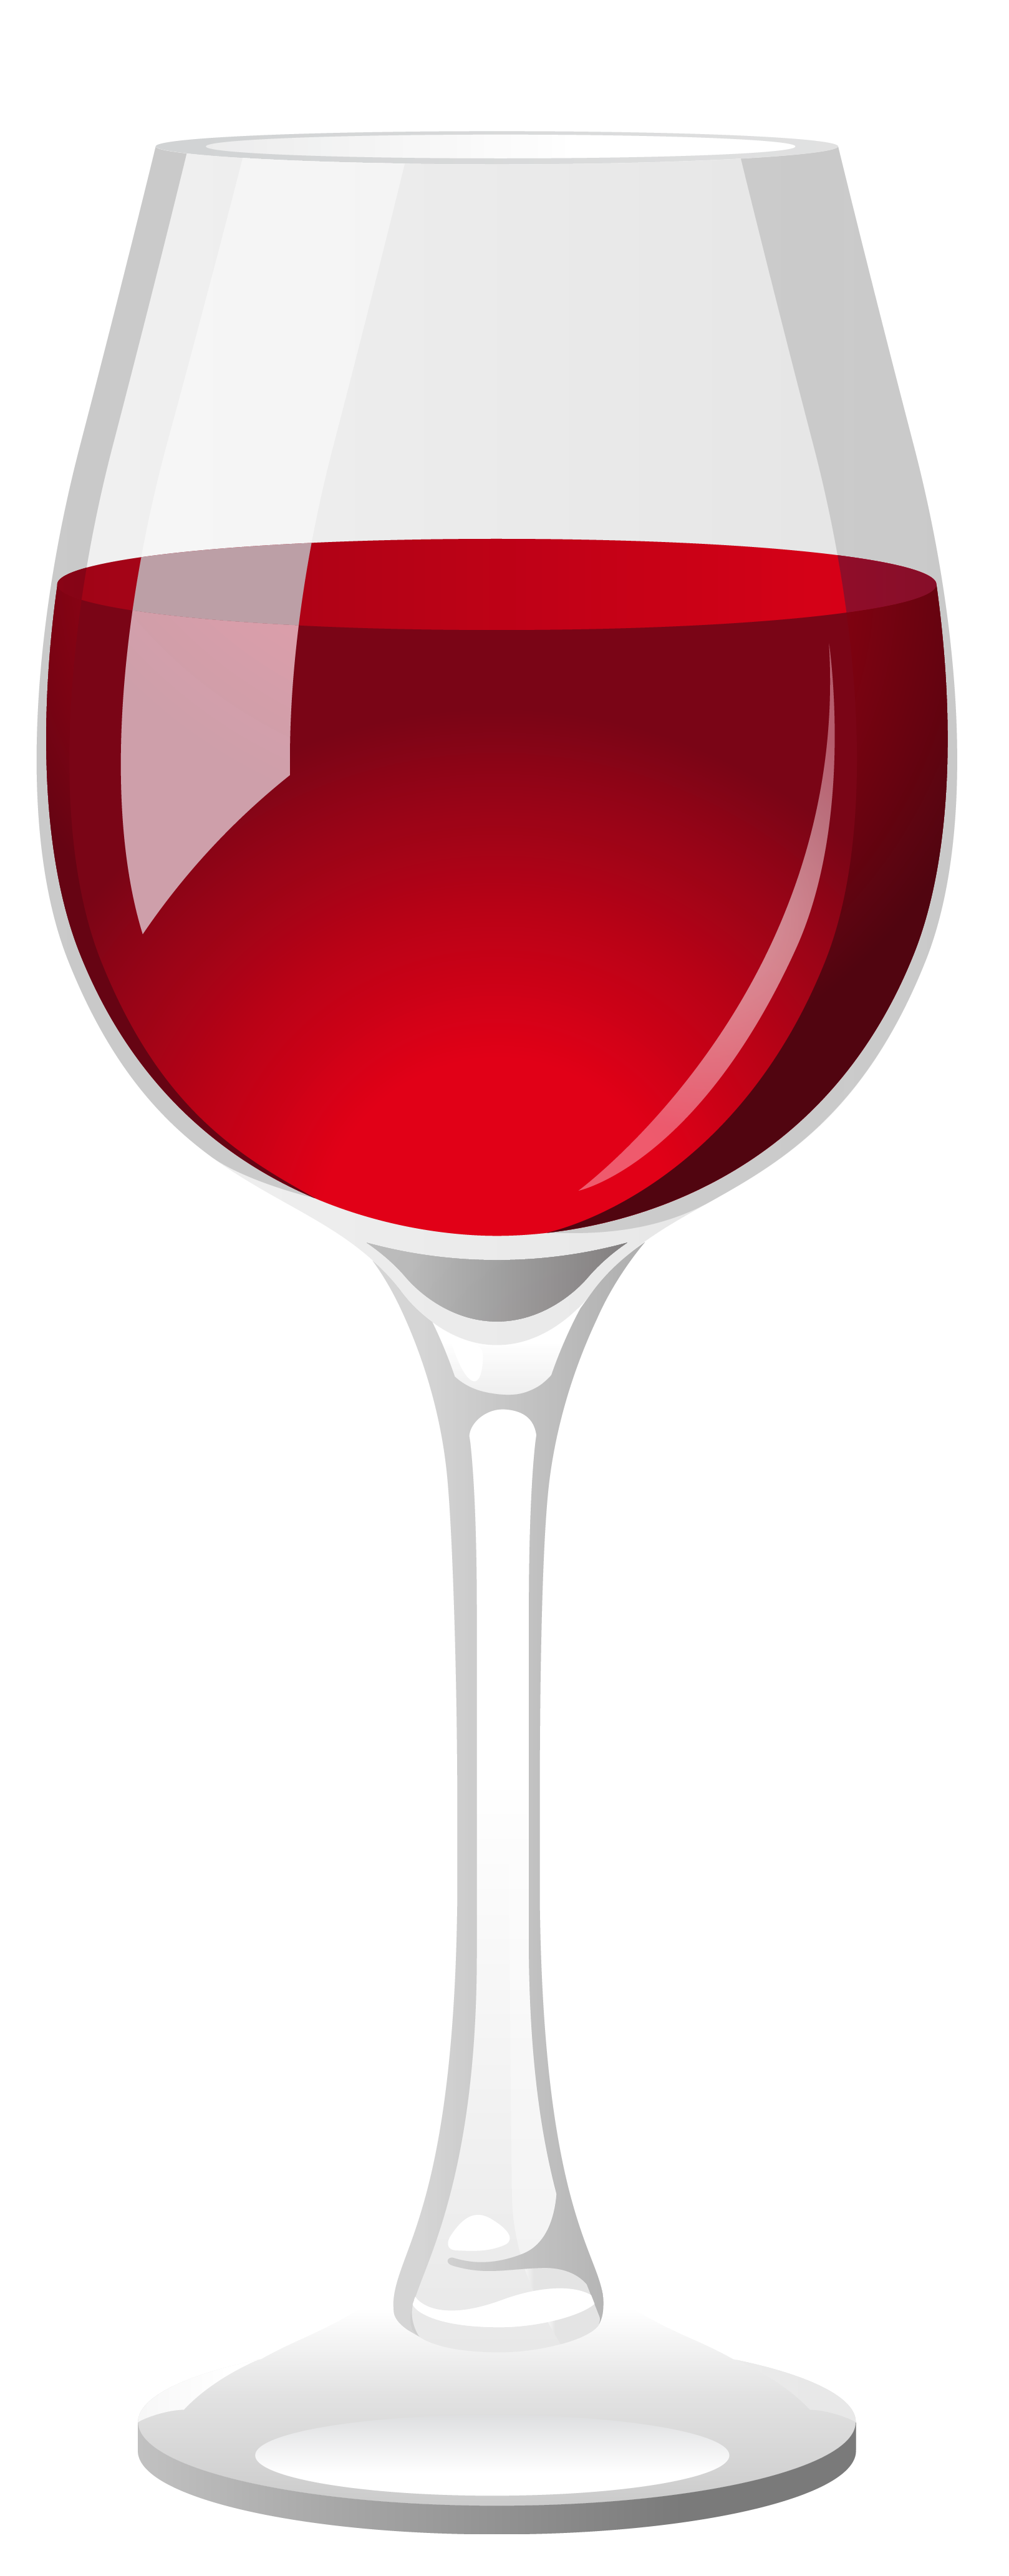 clipart glass of red wine - photo #27